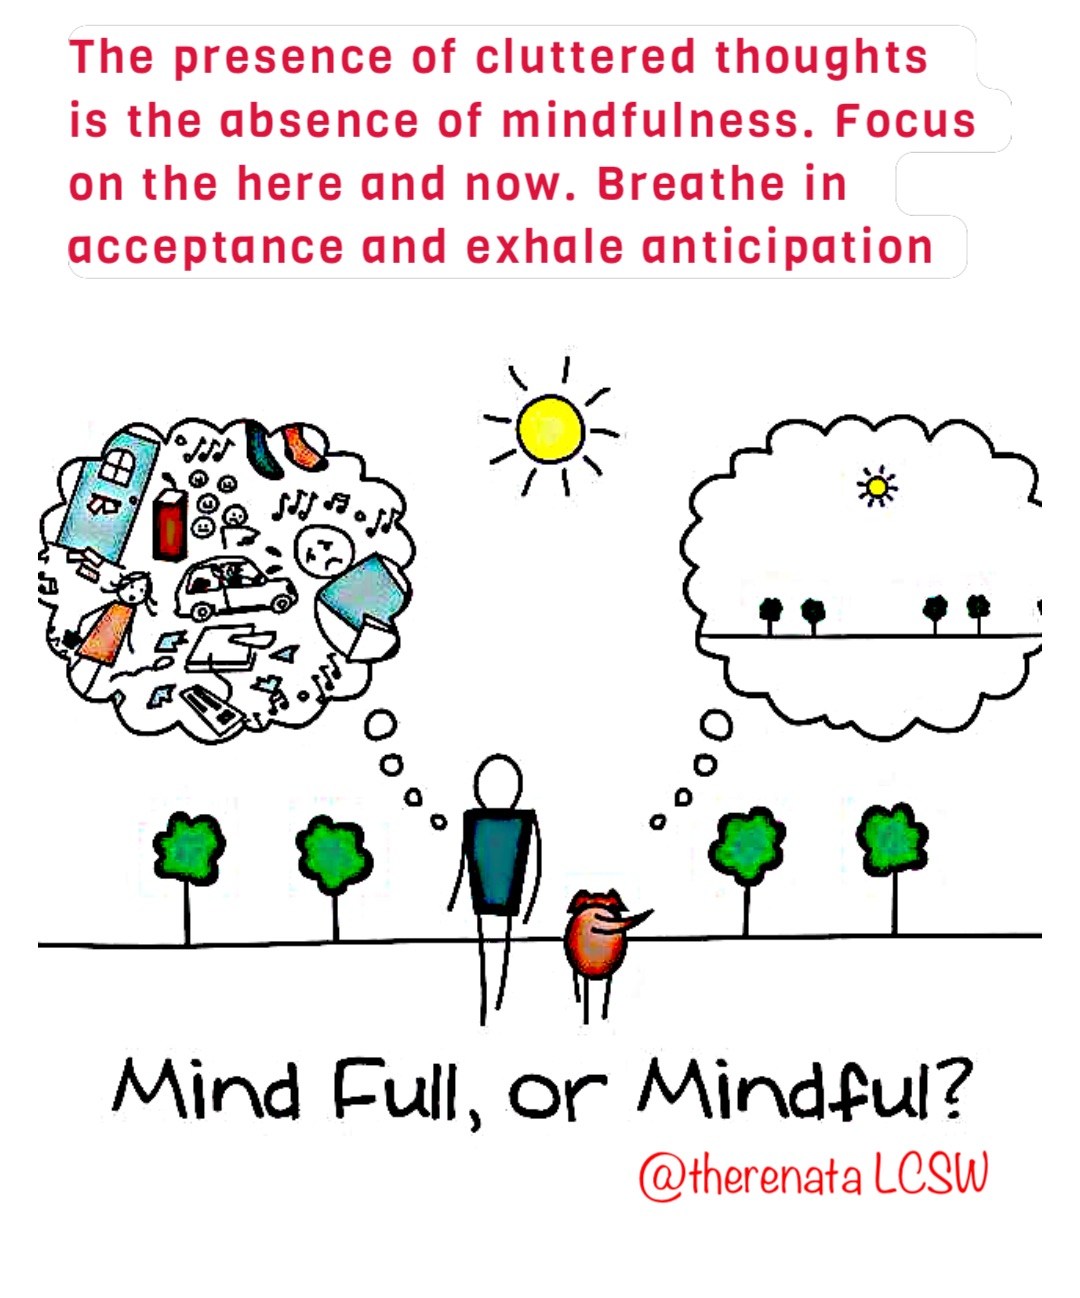 The presence of cluttered thoughts is the absence of mindfulness. Focus on the here and now. Breathe in acceptance and exhale anticipation